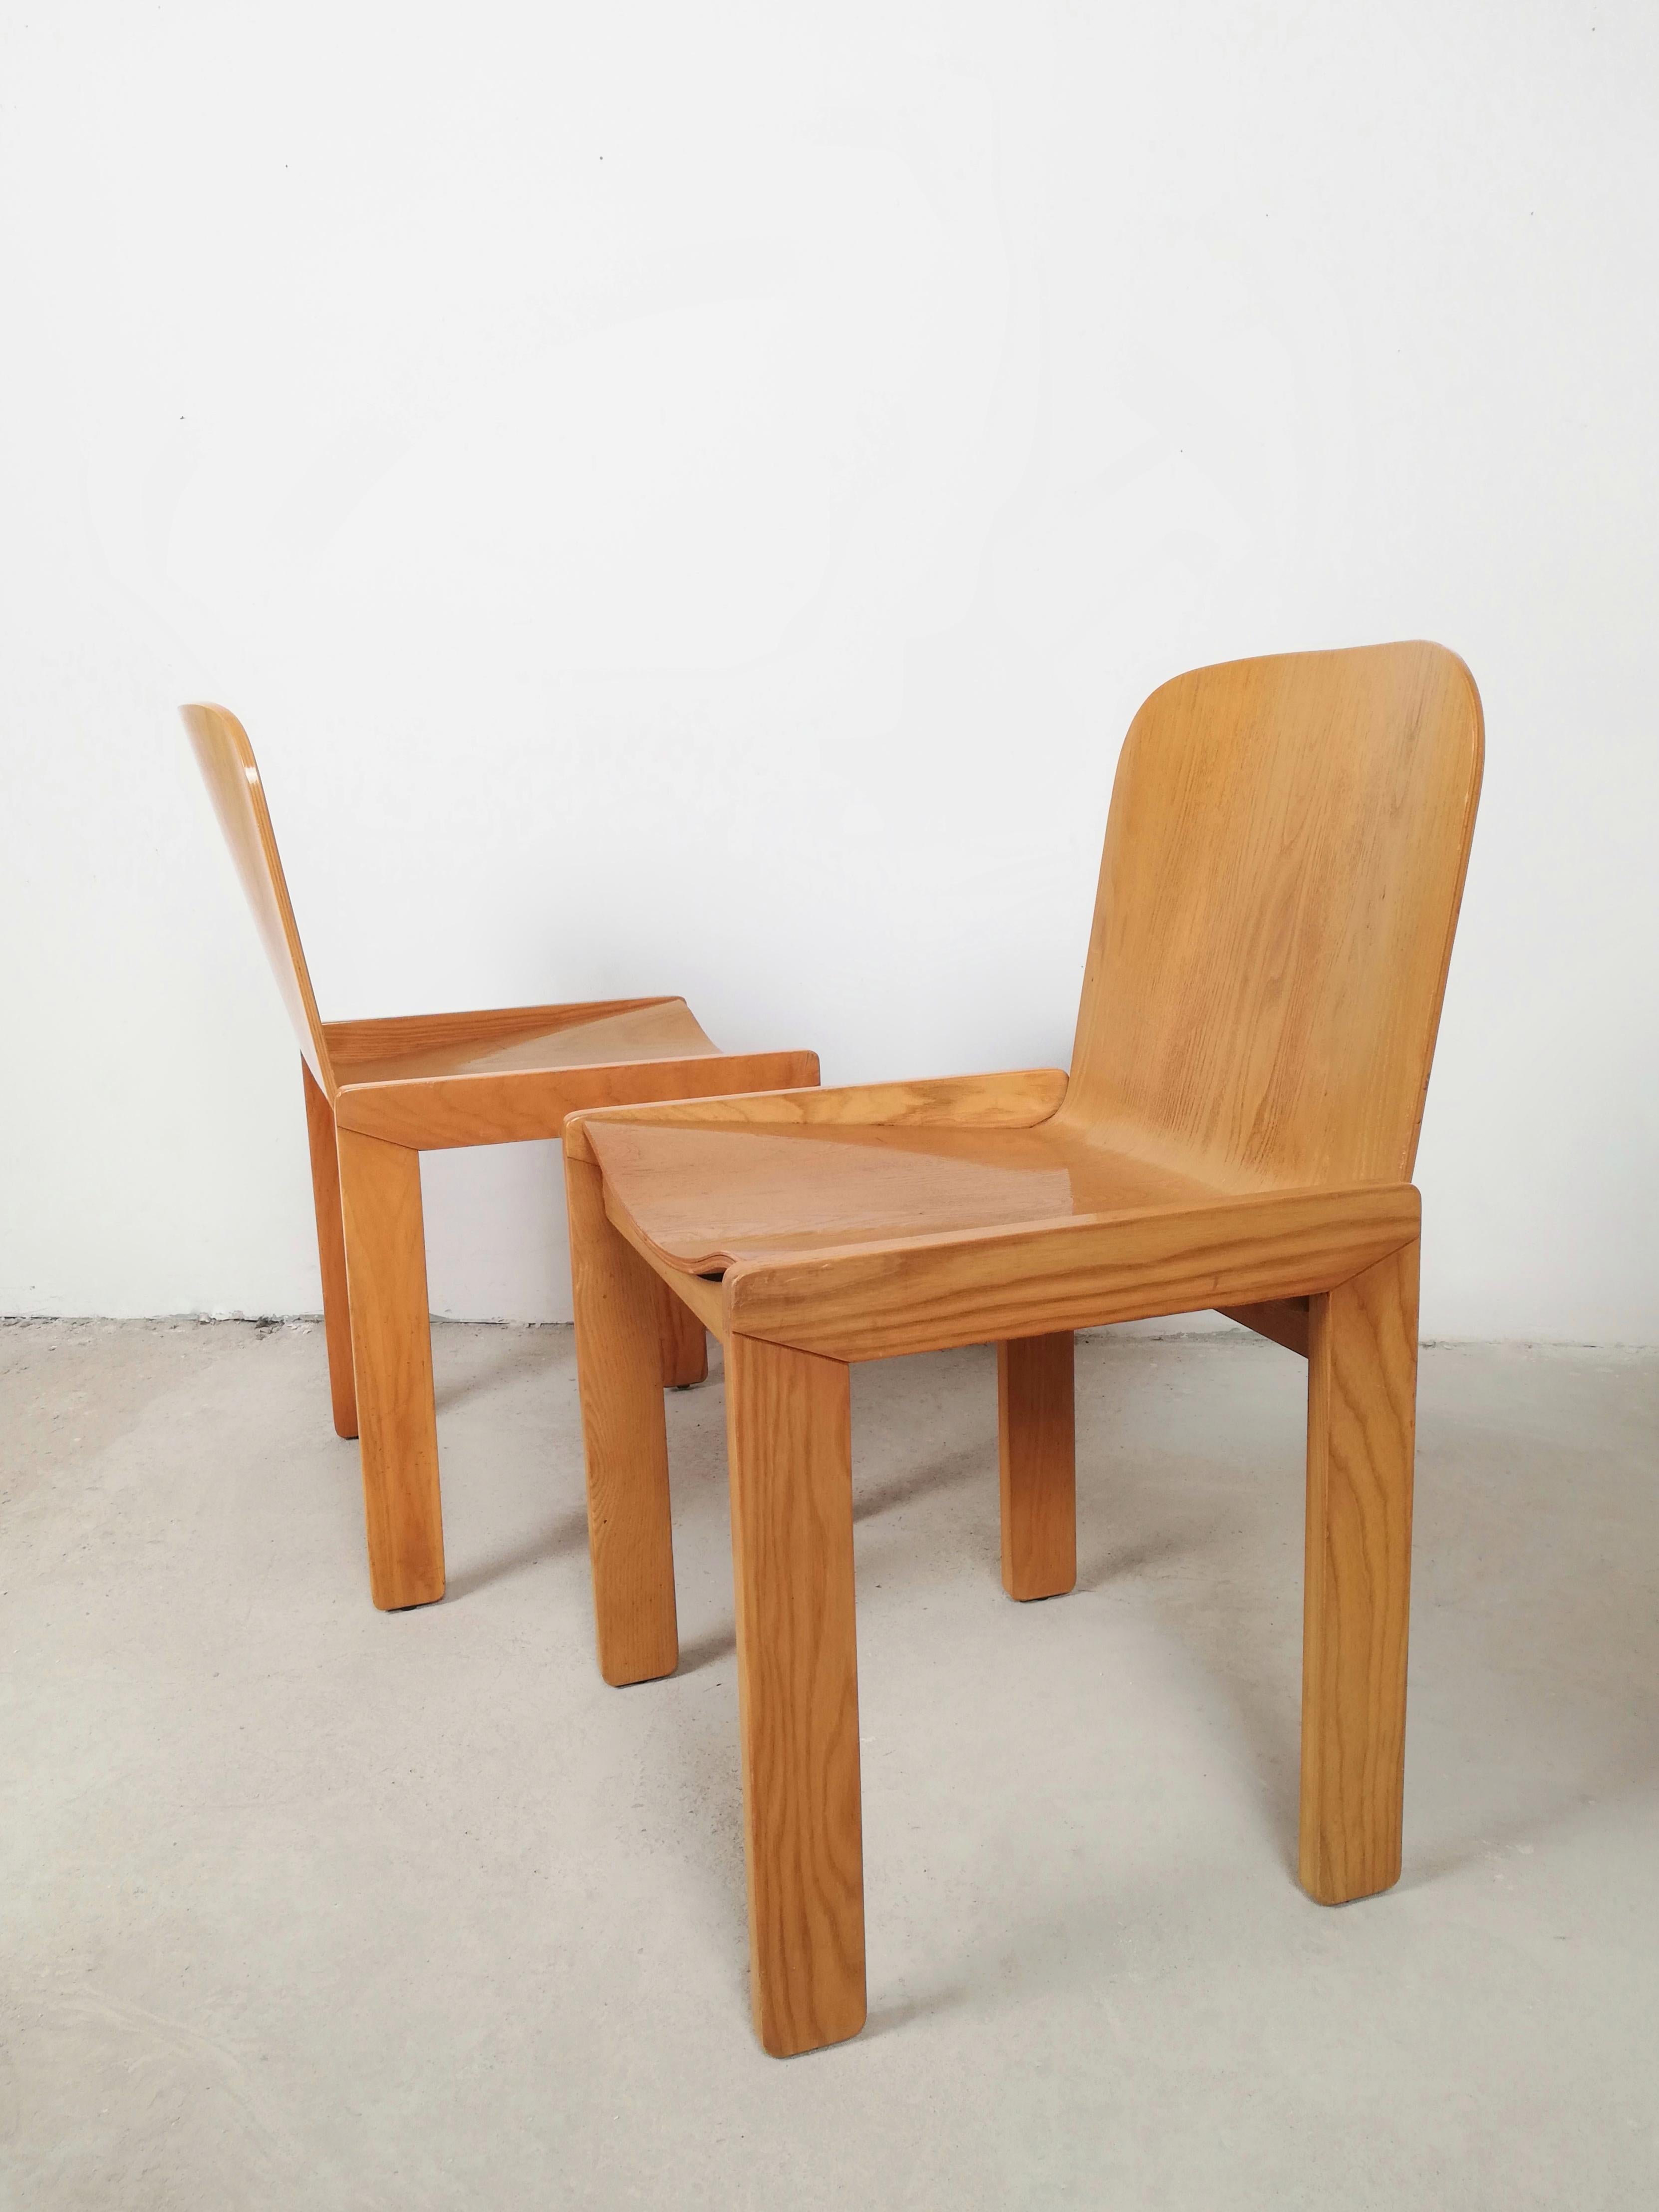 6 Curved Plywood Dining Chairs by Molteni in the style of Scarpa, Italy, 1970s For Sale 1